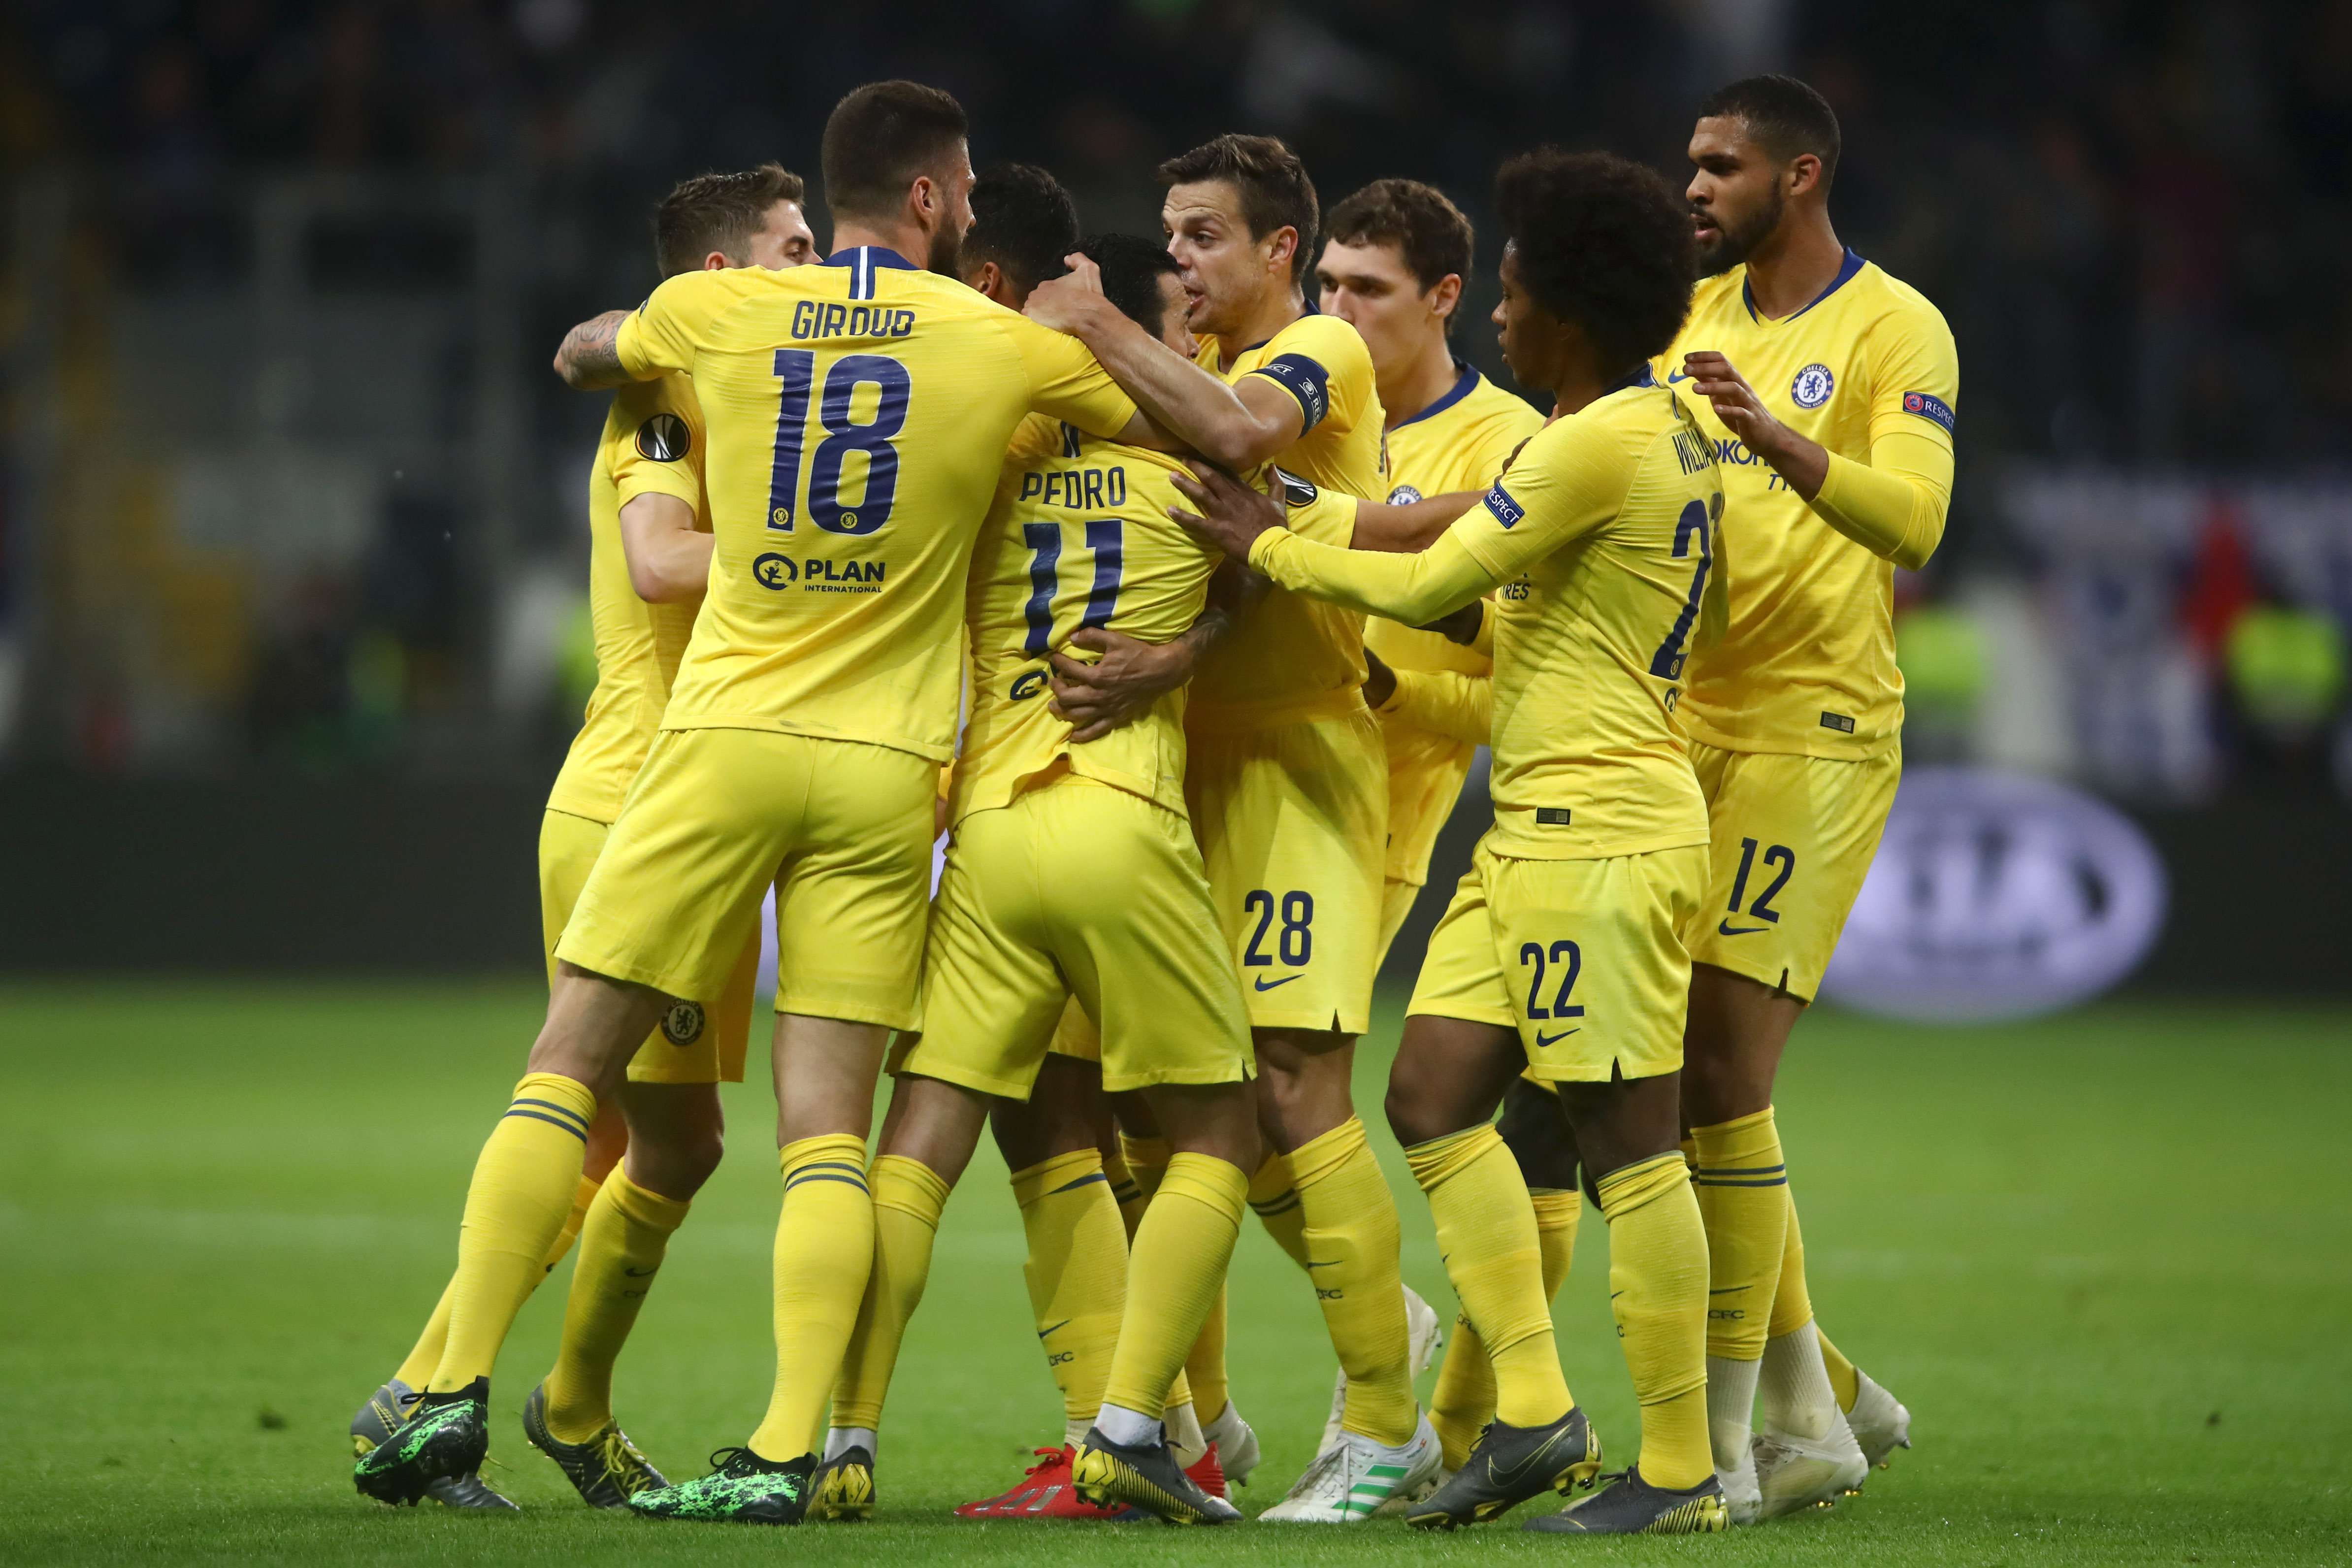 FRANKFURT AM MAIN, GERMANY - MAY 02:  Pedro of Chelsea (11) celebrates after scoring his team's first goal with team mates during the UEFA Europa League Semi Final First Leg match between Eintracht Frankfurt and Chelsea at Commerzbank-Arena on May 02, 2019 in Frankfurt am Main, Germany. (Photo by Alex Grimm/Bongarts/Getty Images,)